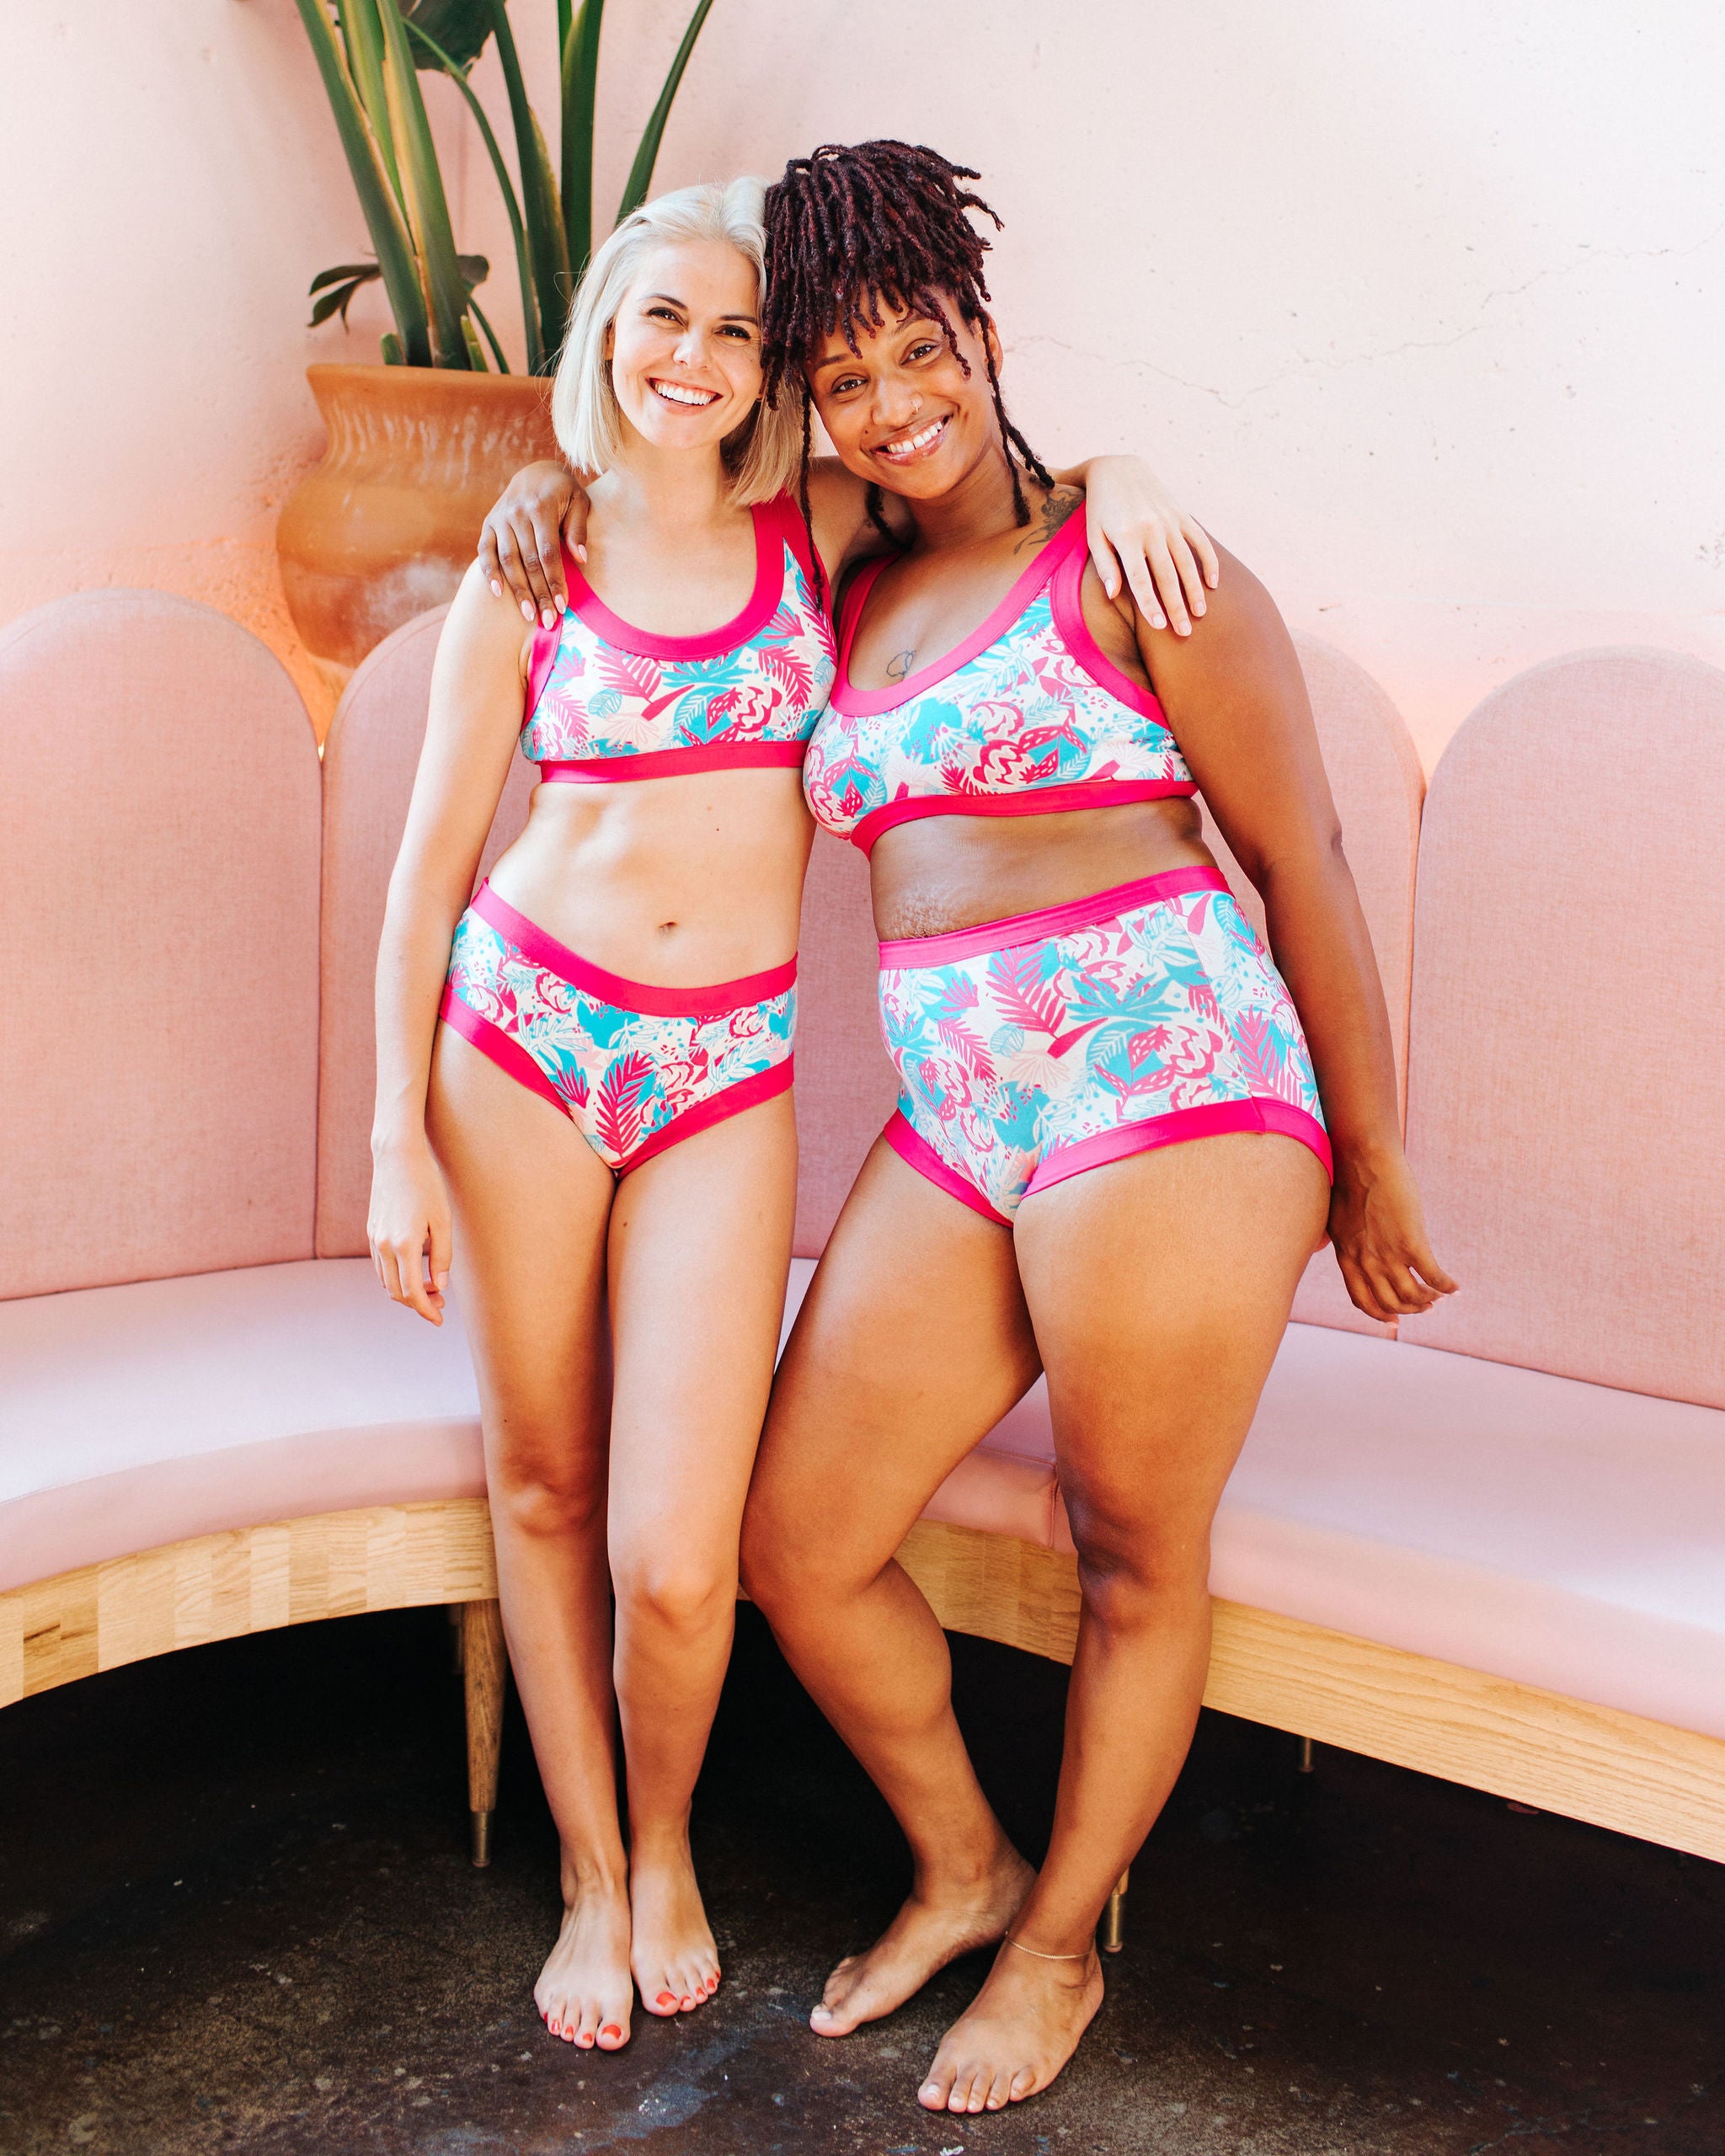 Two models smiling while wearing sets of Thunderpants Hipster and Sky Rise style underwear and Bralettes in Finding Flamingos - pink and blue Miami-inspired print.